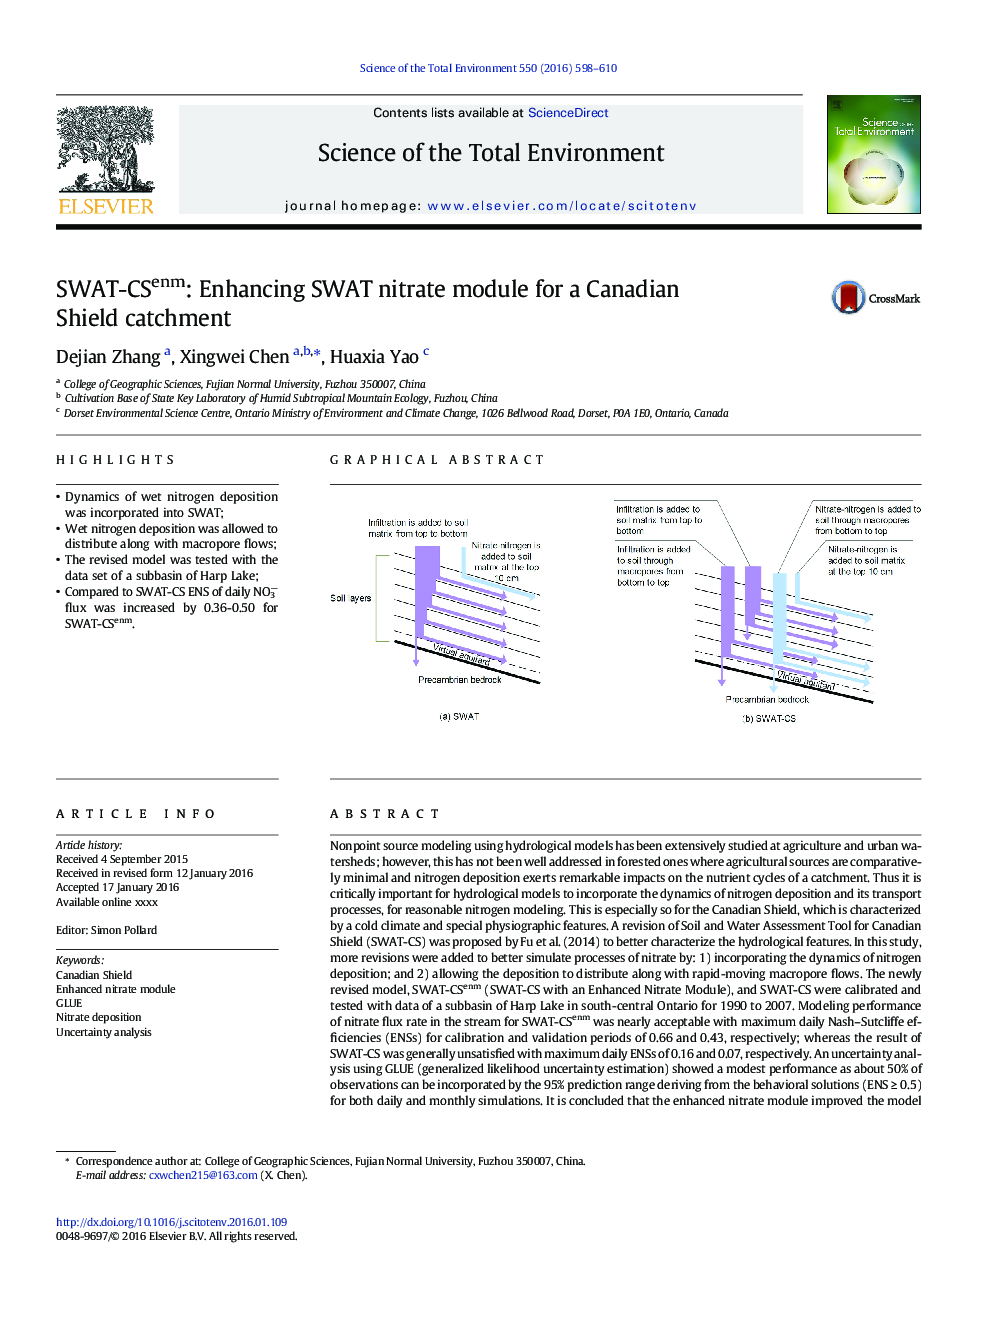 SWAT-CSenm: Enhancing SWAT nitrate module for a Canadian Shield catchment